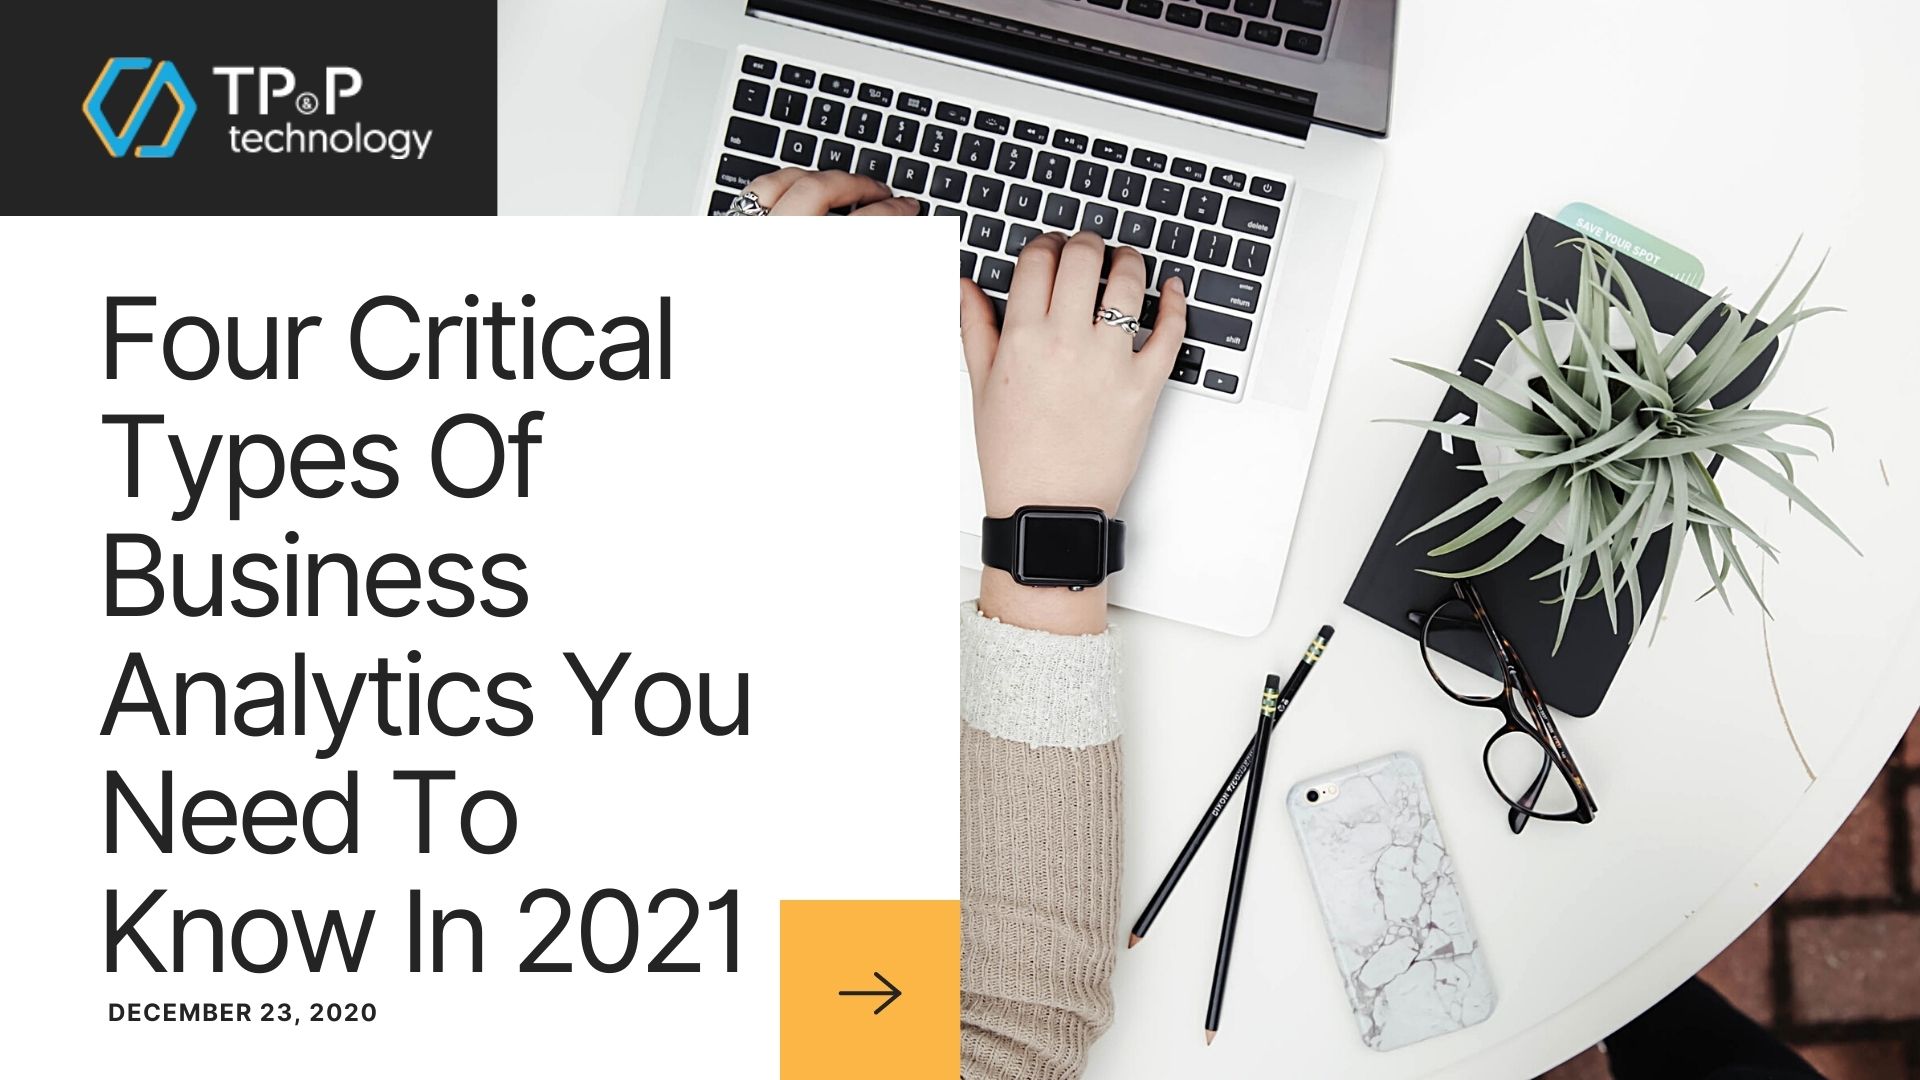 Four Critical Types Of Business Analytics You Need To Know In 2021